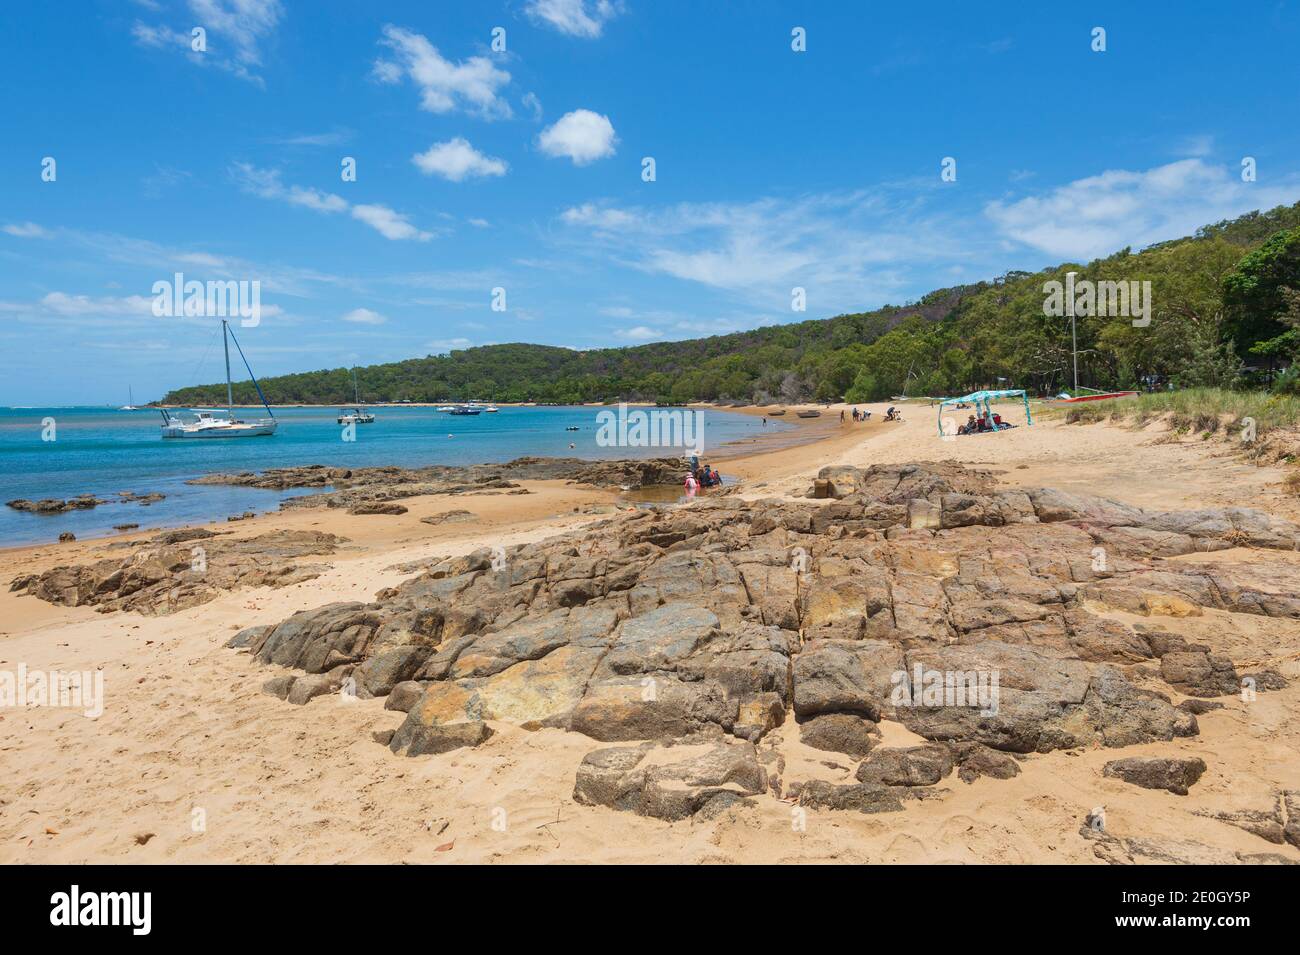 View of the sandy beach at the Town of 1770 (Seventeen Seventy), Queensland, QLD, Australia Stock Photo